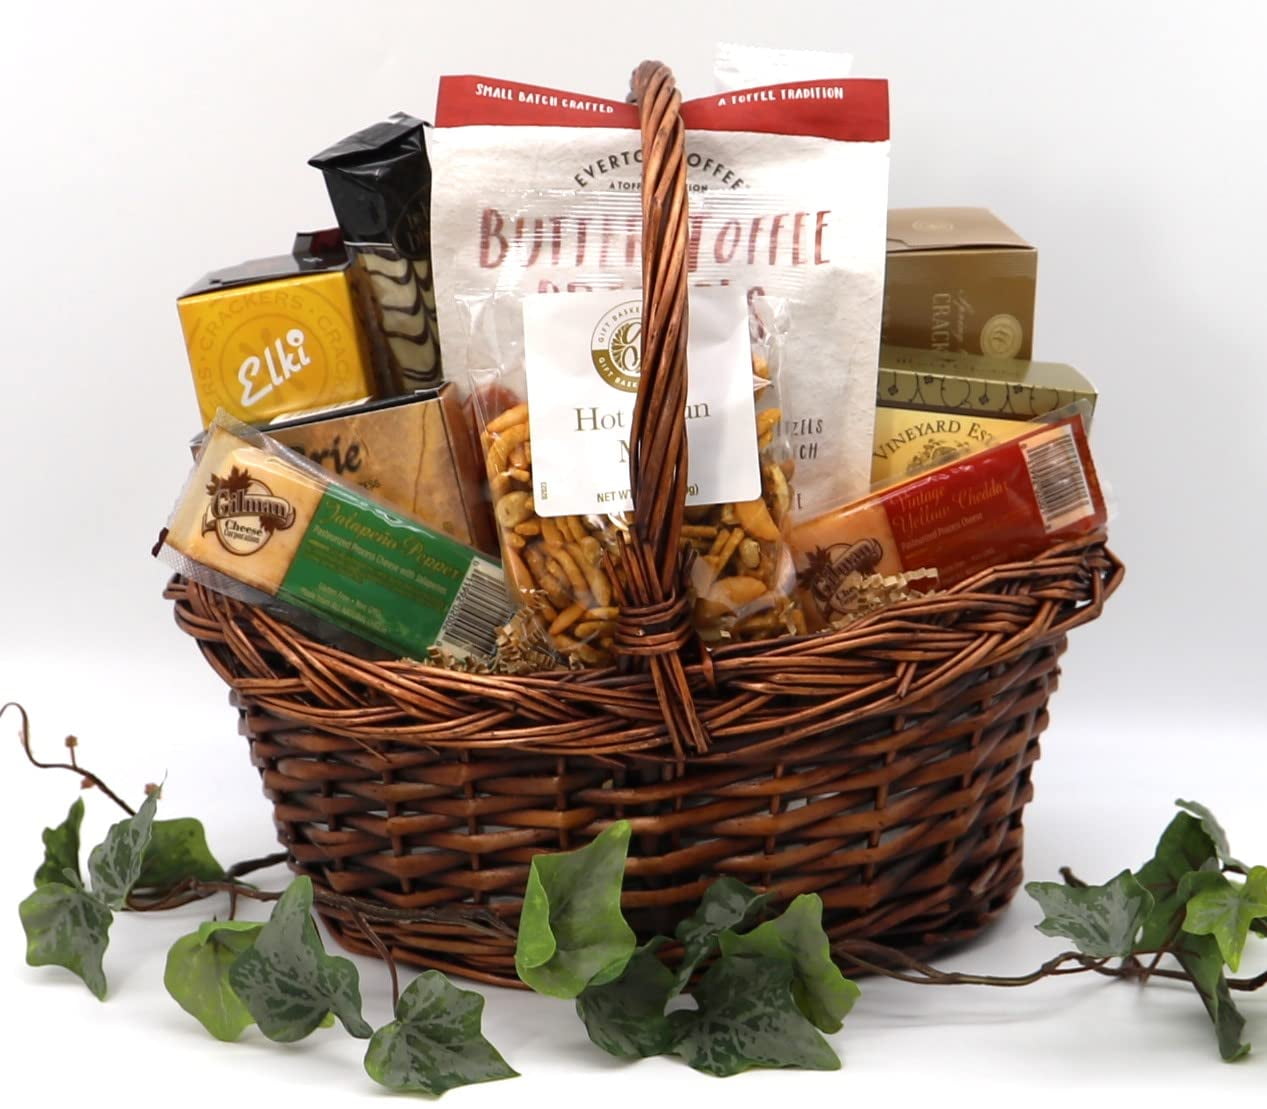 Fishing Gift Basket With Gourmet Snacks To Enjoy While Fishing - A